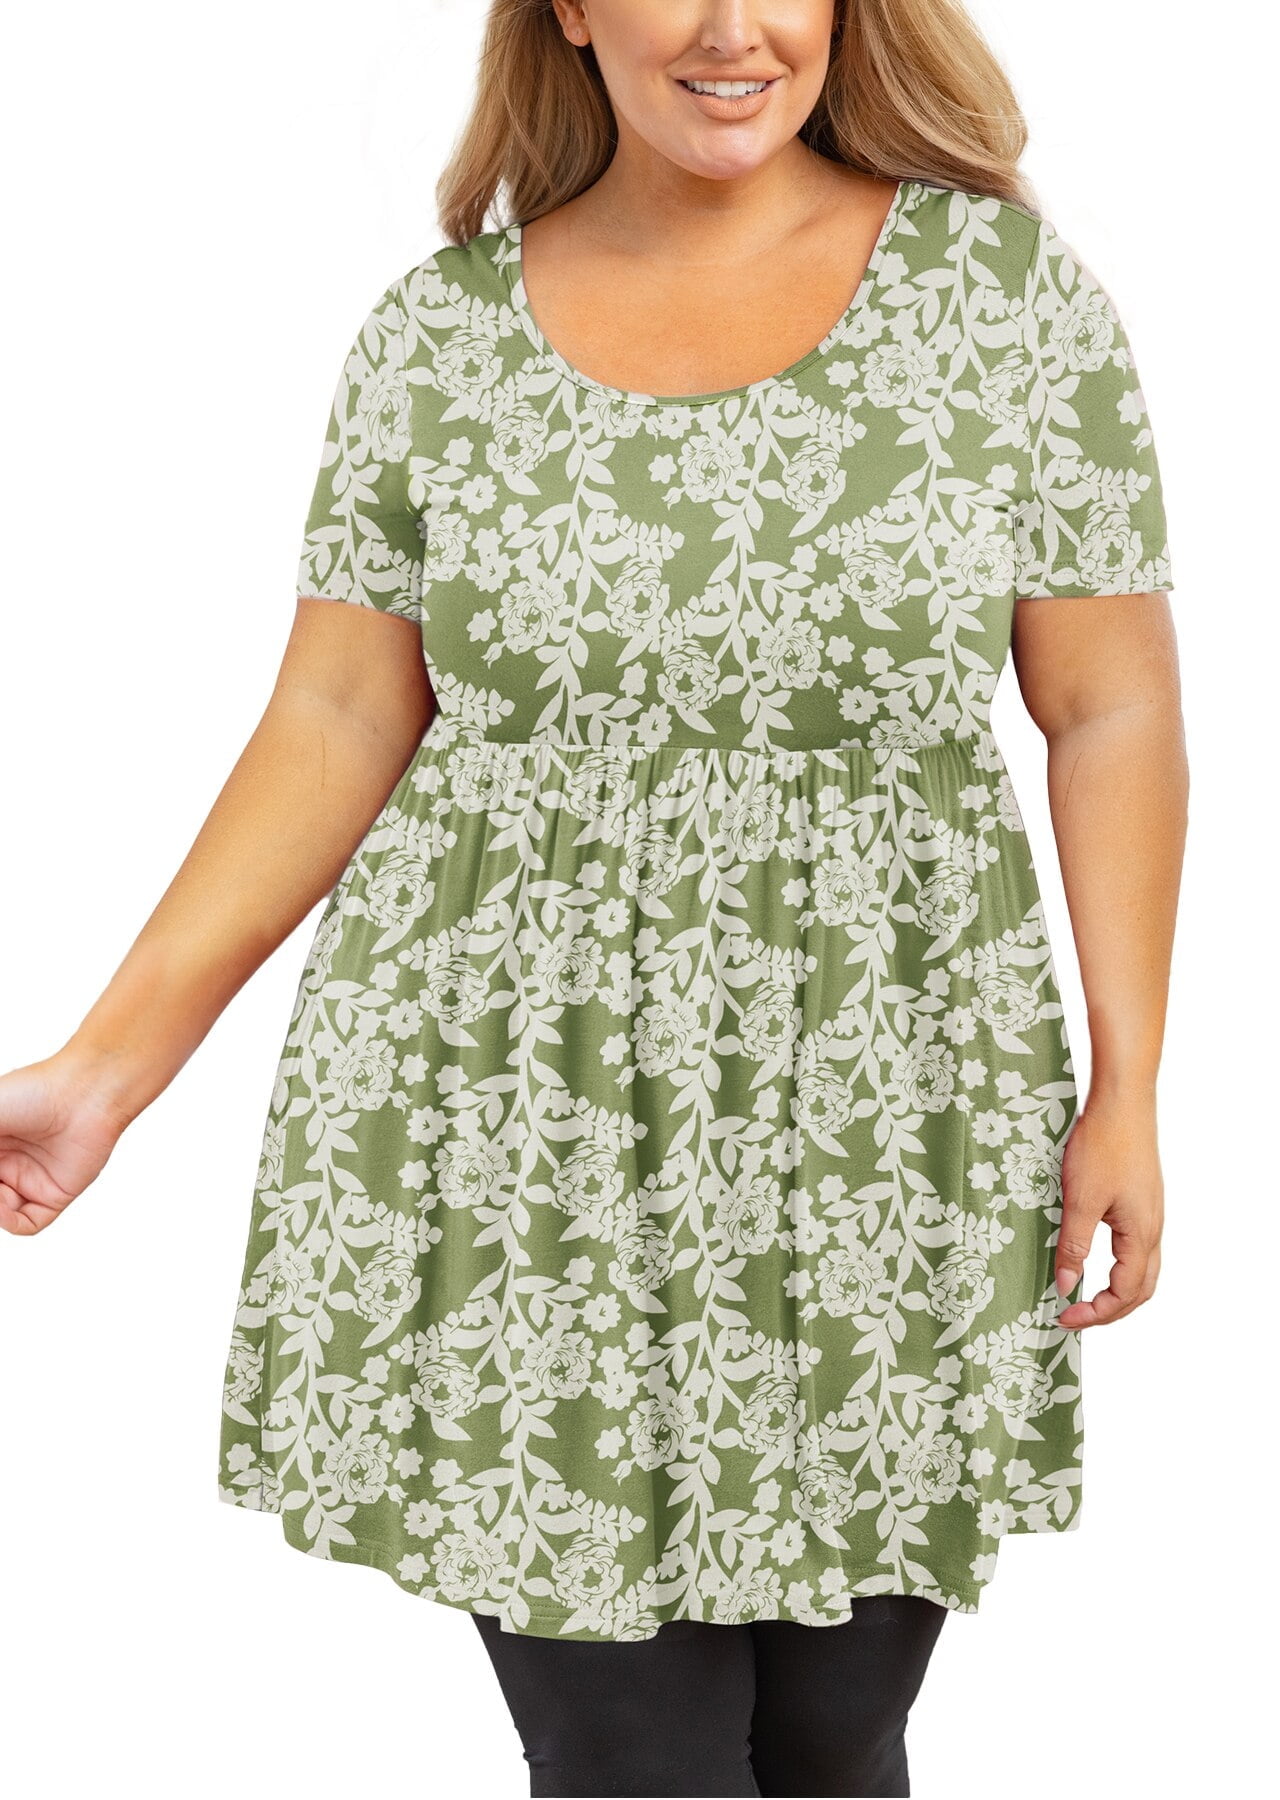 warehouse deals canada Summer Tunic Tops for Women Plus Size V